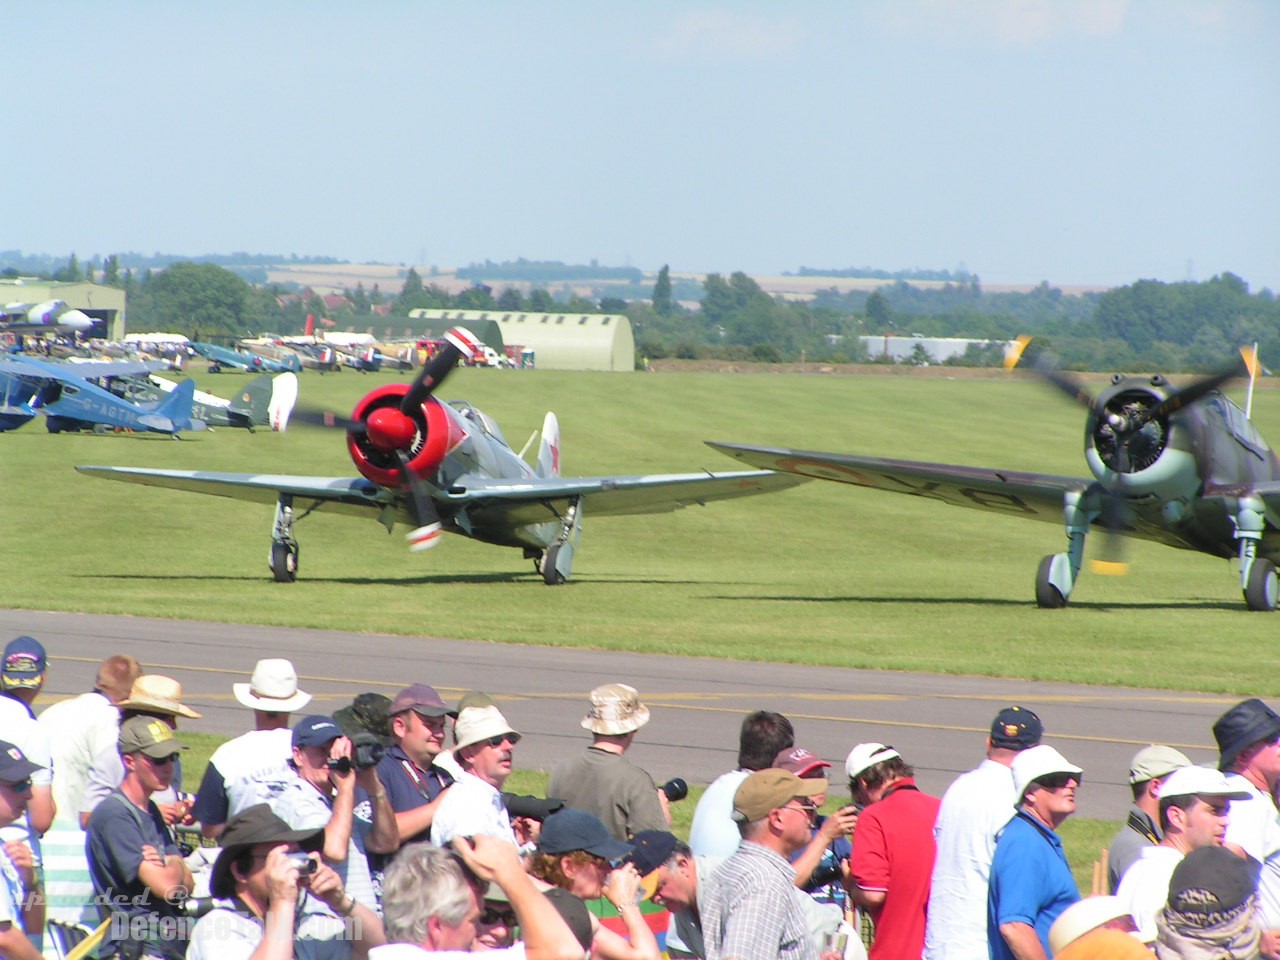 Flying Legends 2005 Air Show